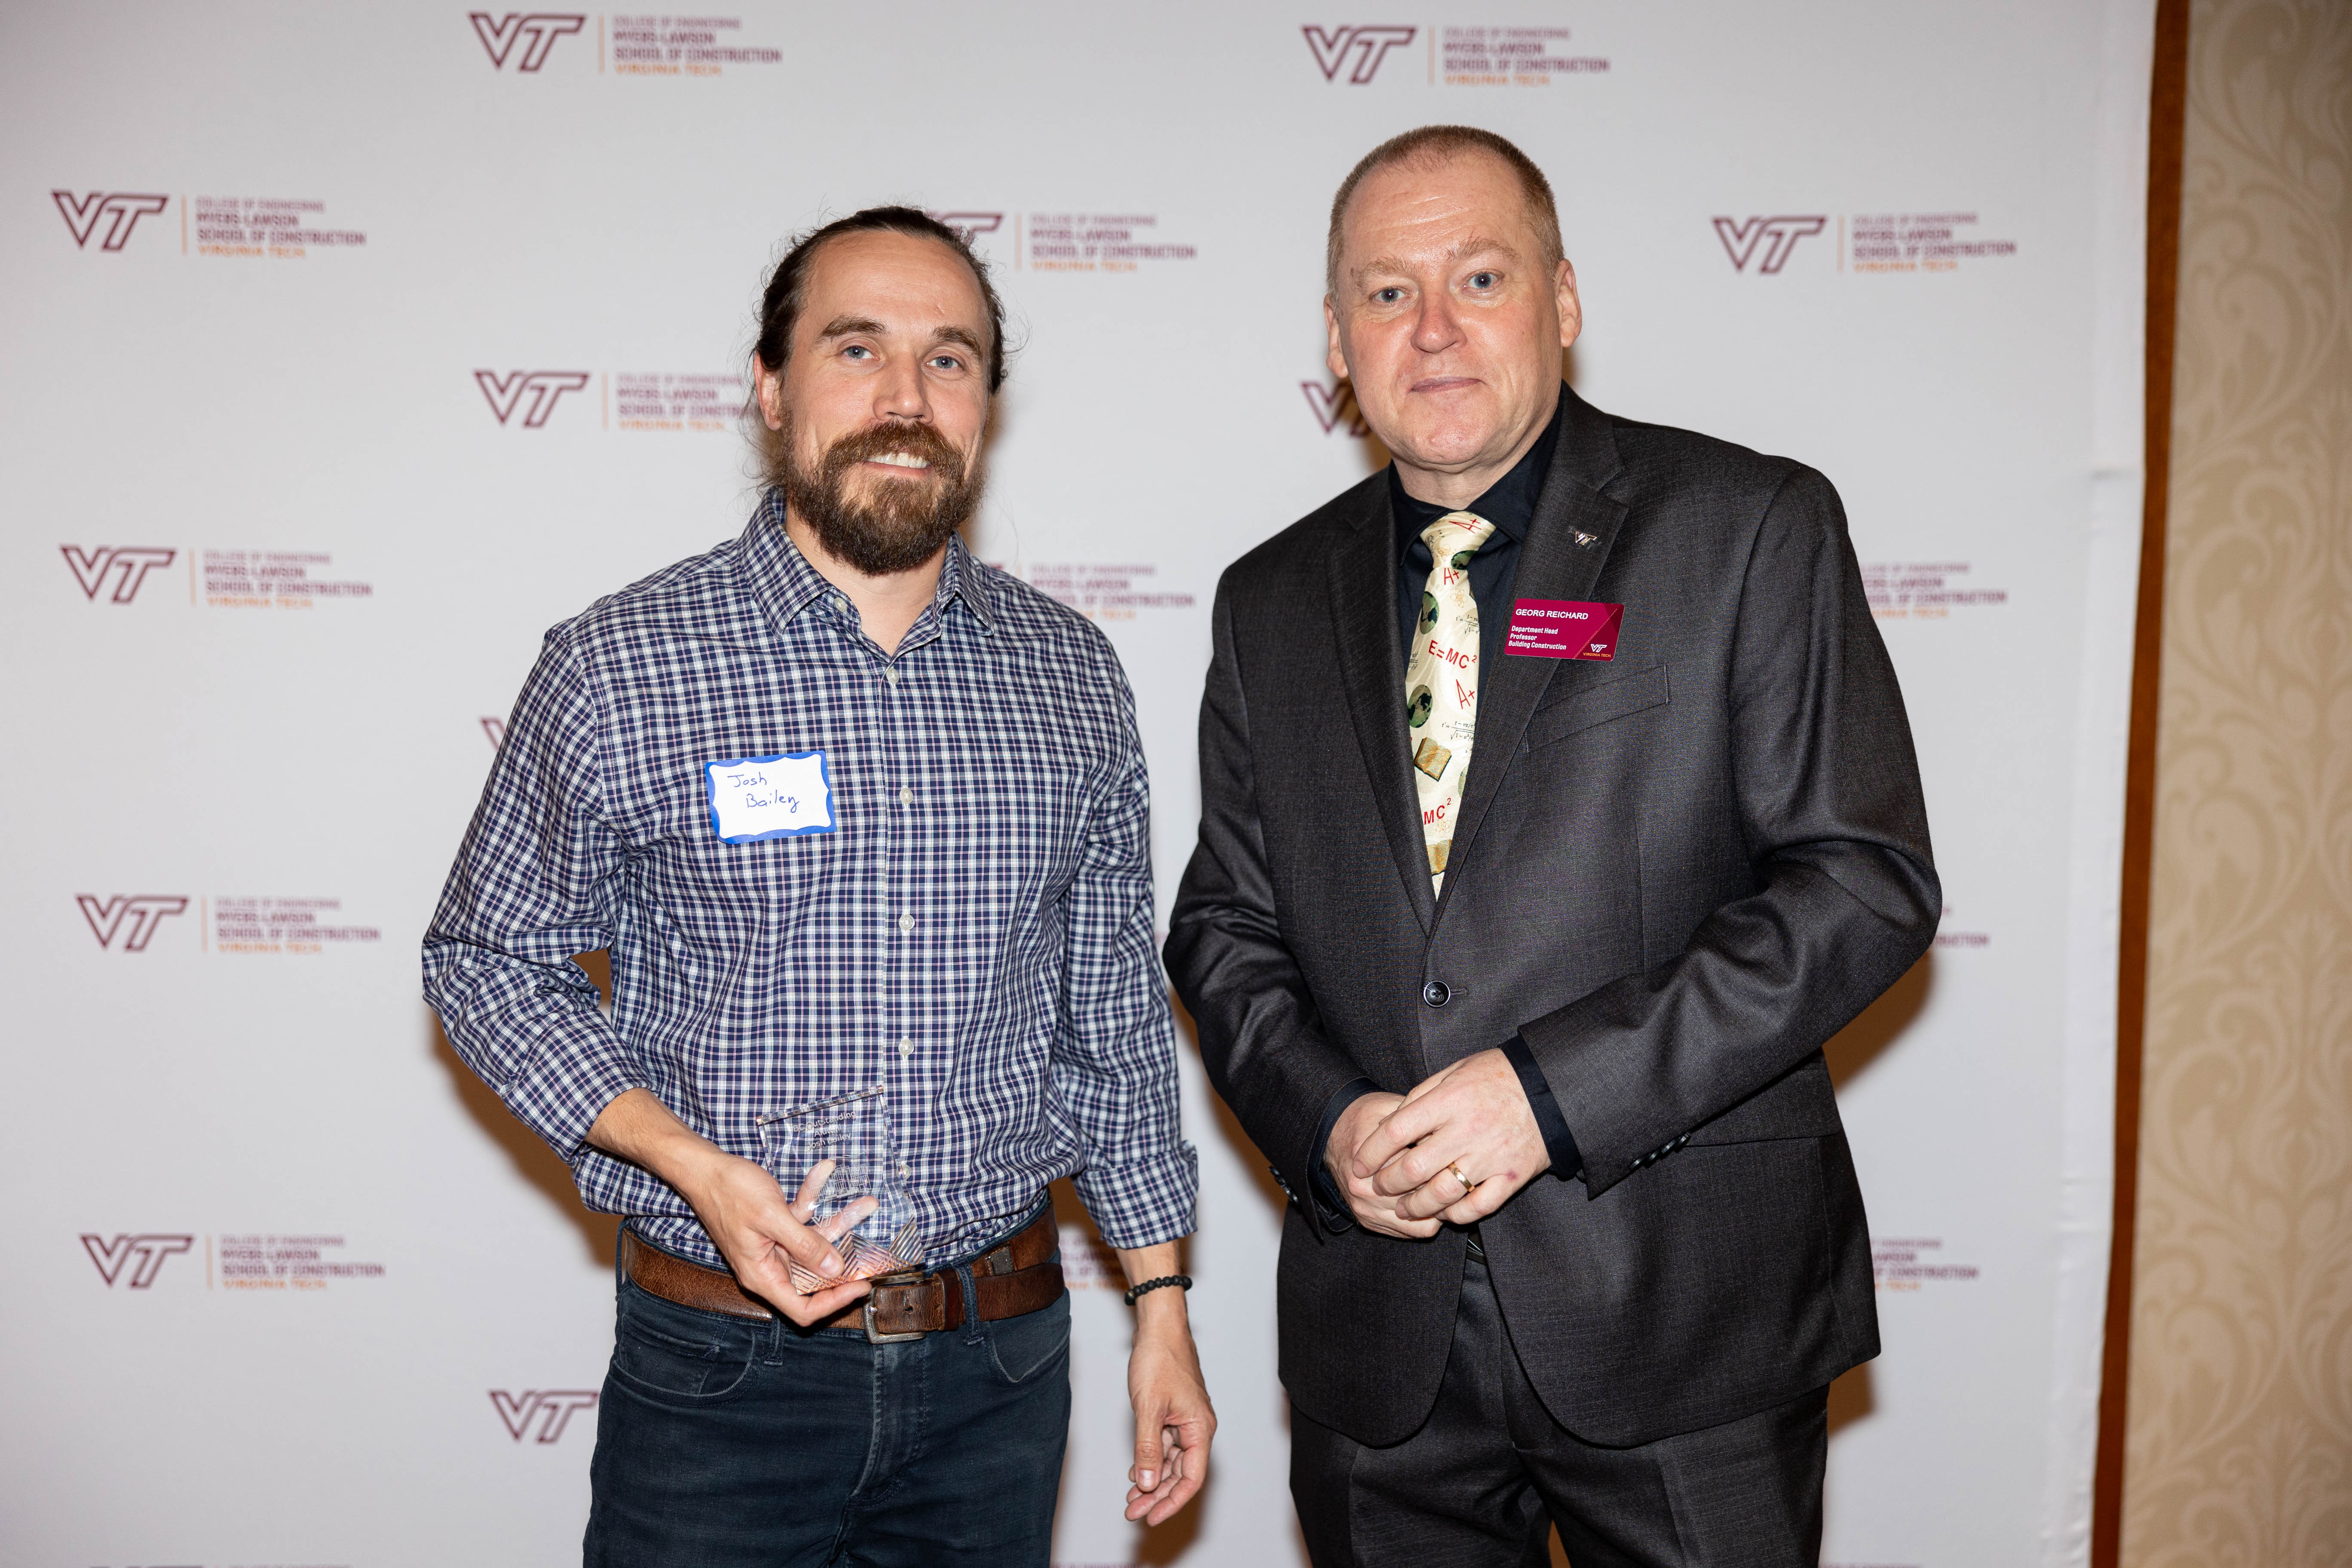 Georg Reichard (at left) and Joshua Bailey '09. Photo by Will Drew for Virginia Tech.